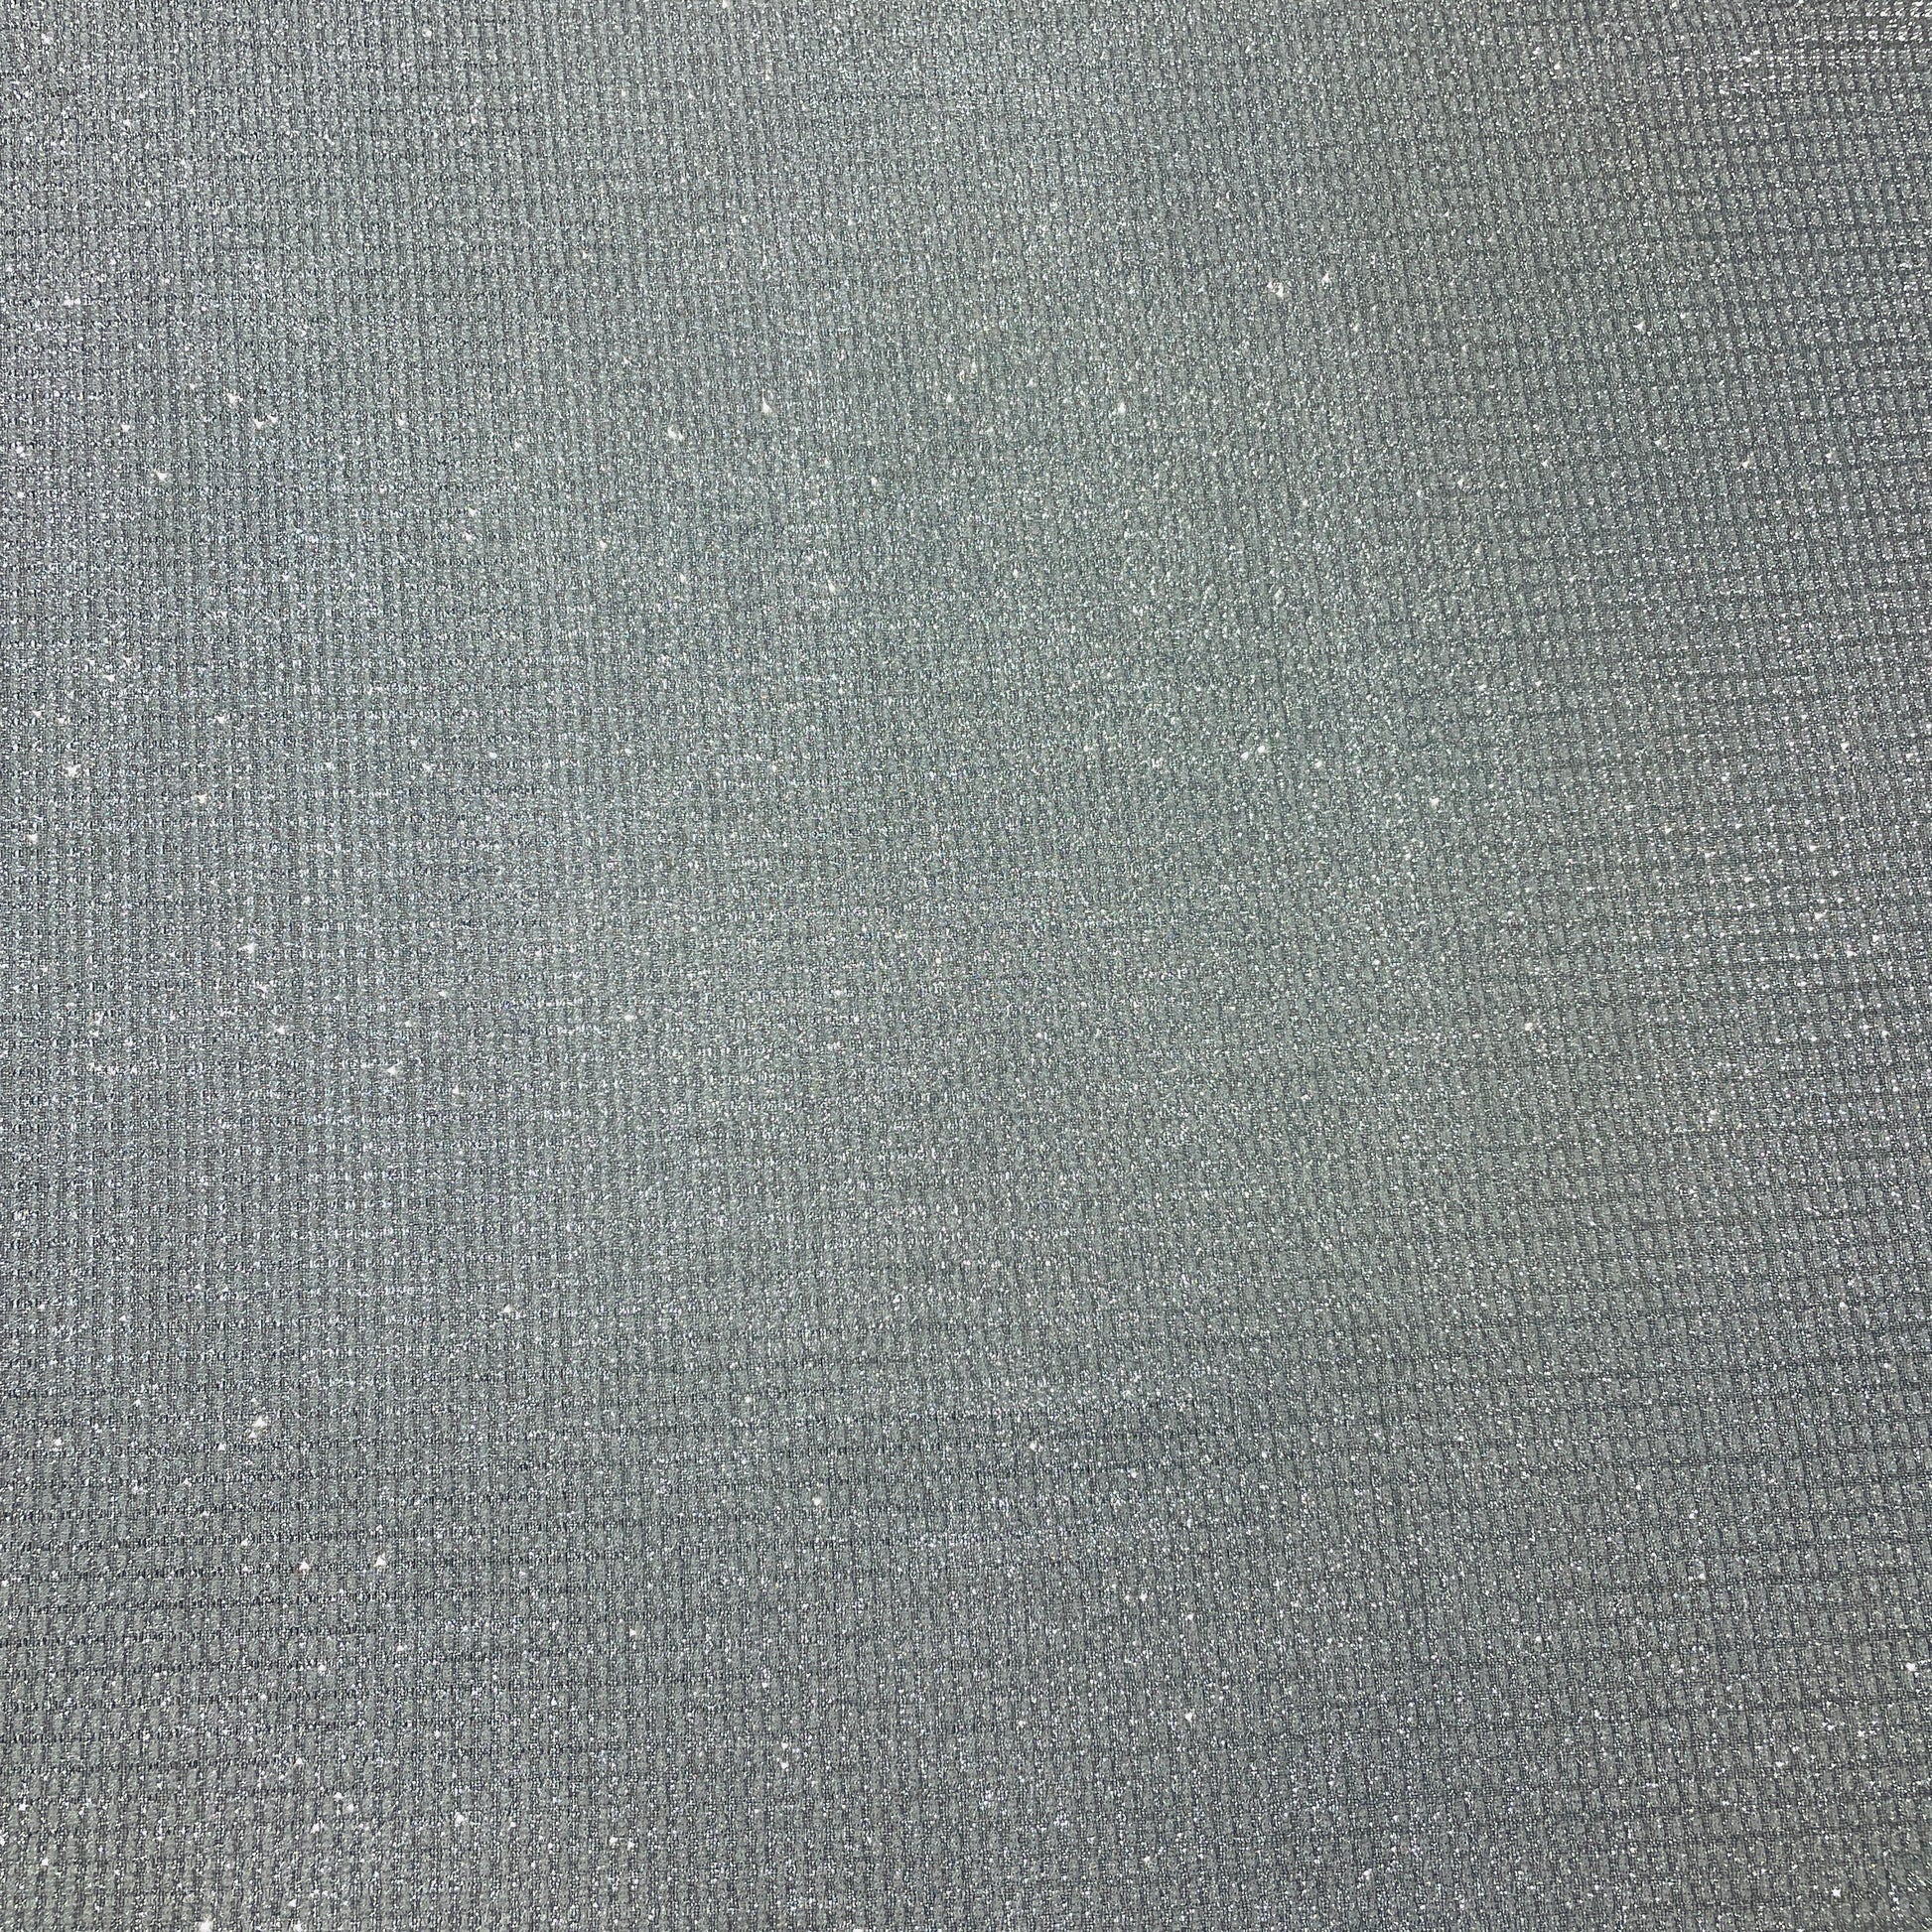 Grey Foil Print Shimmer Knitted Lycra Fabric - TradeUNO